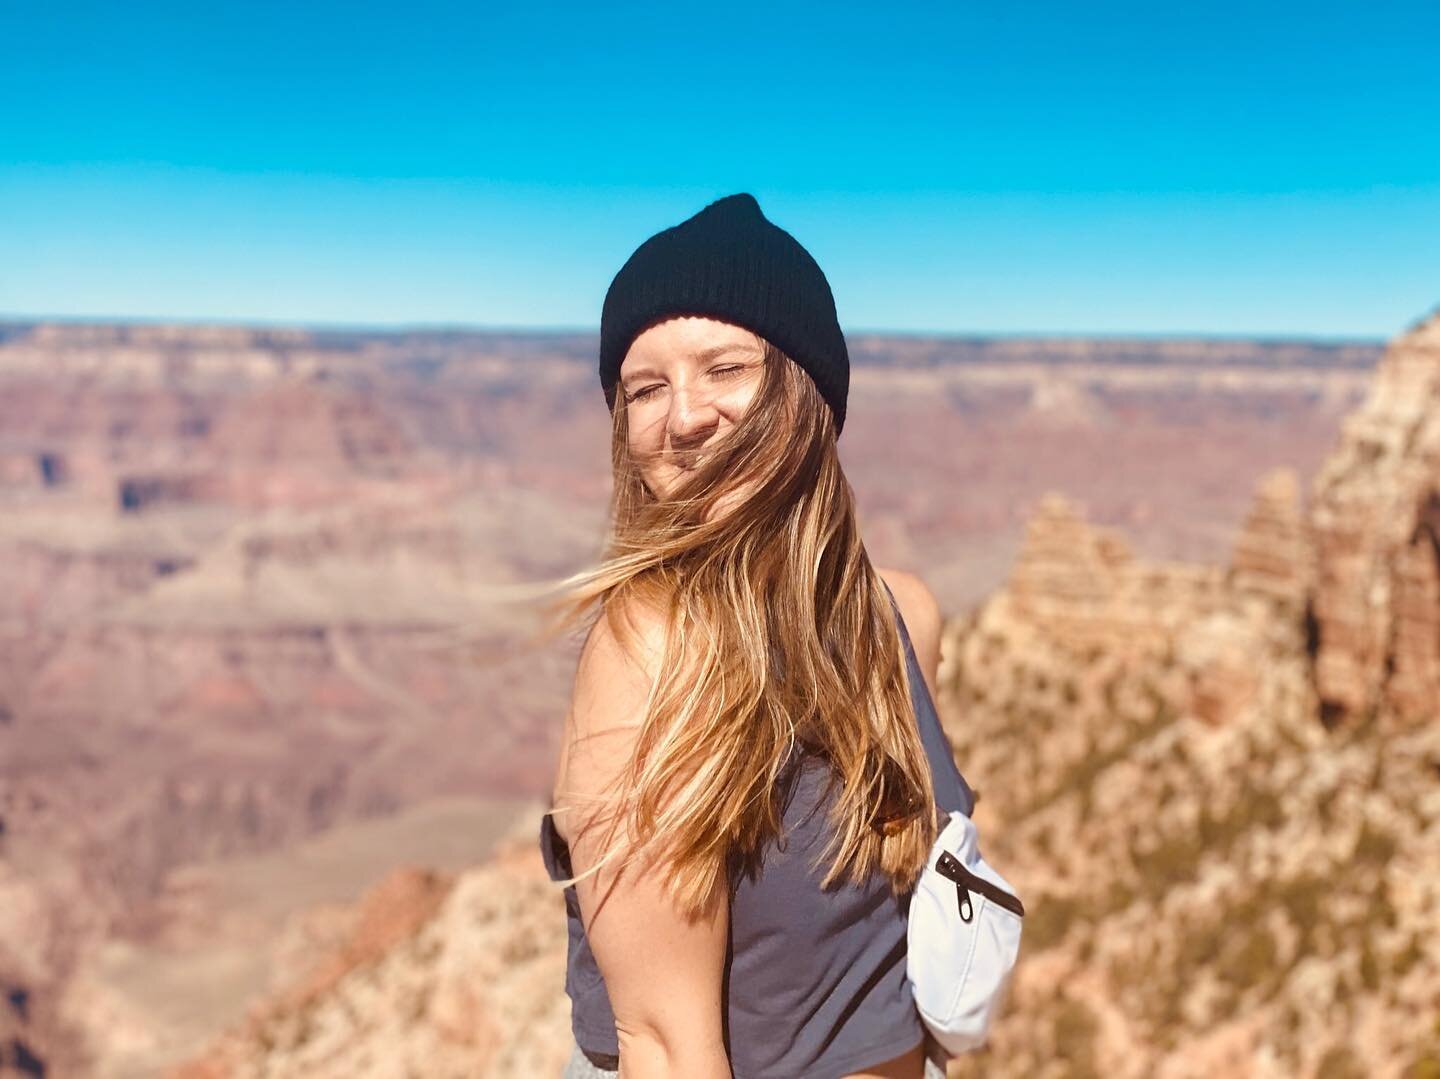 HBD to our ray of ☀️ @kendall_daaaviess. We are grateful for your genuine kindness and sense of humor, your work ethic and drive and your love-life spirit. Thank you for the smiles and energy you bring our team and our clients over the past five year